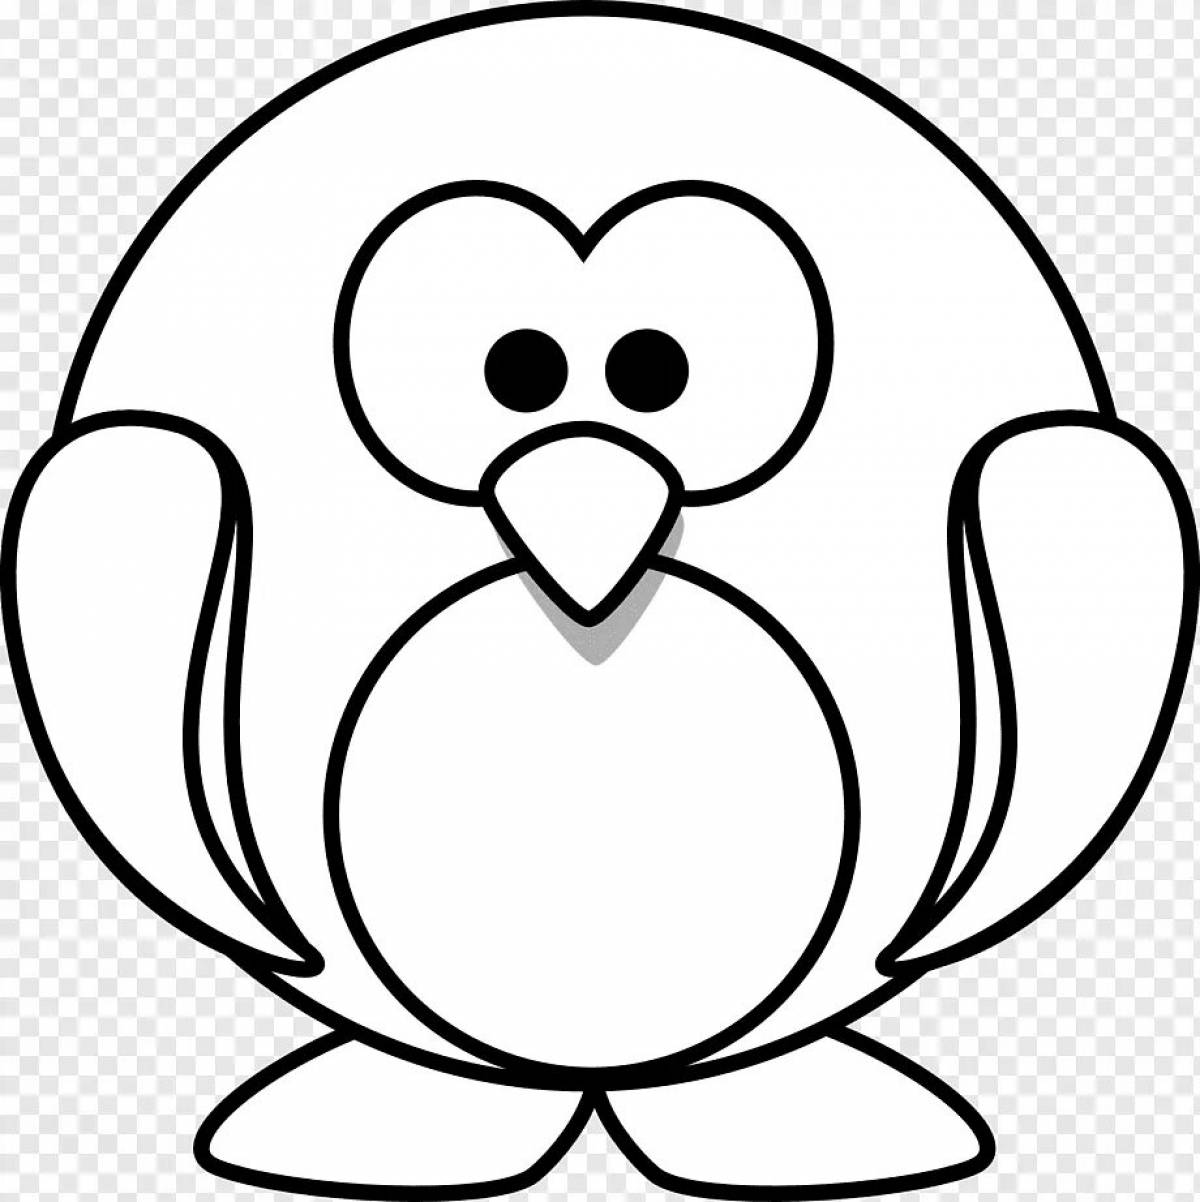 Wonderful penguin coloring pages for kids